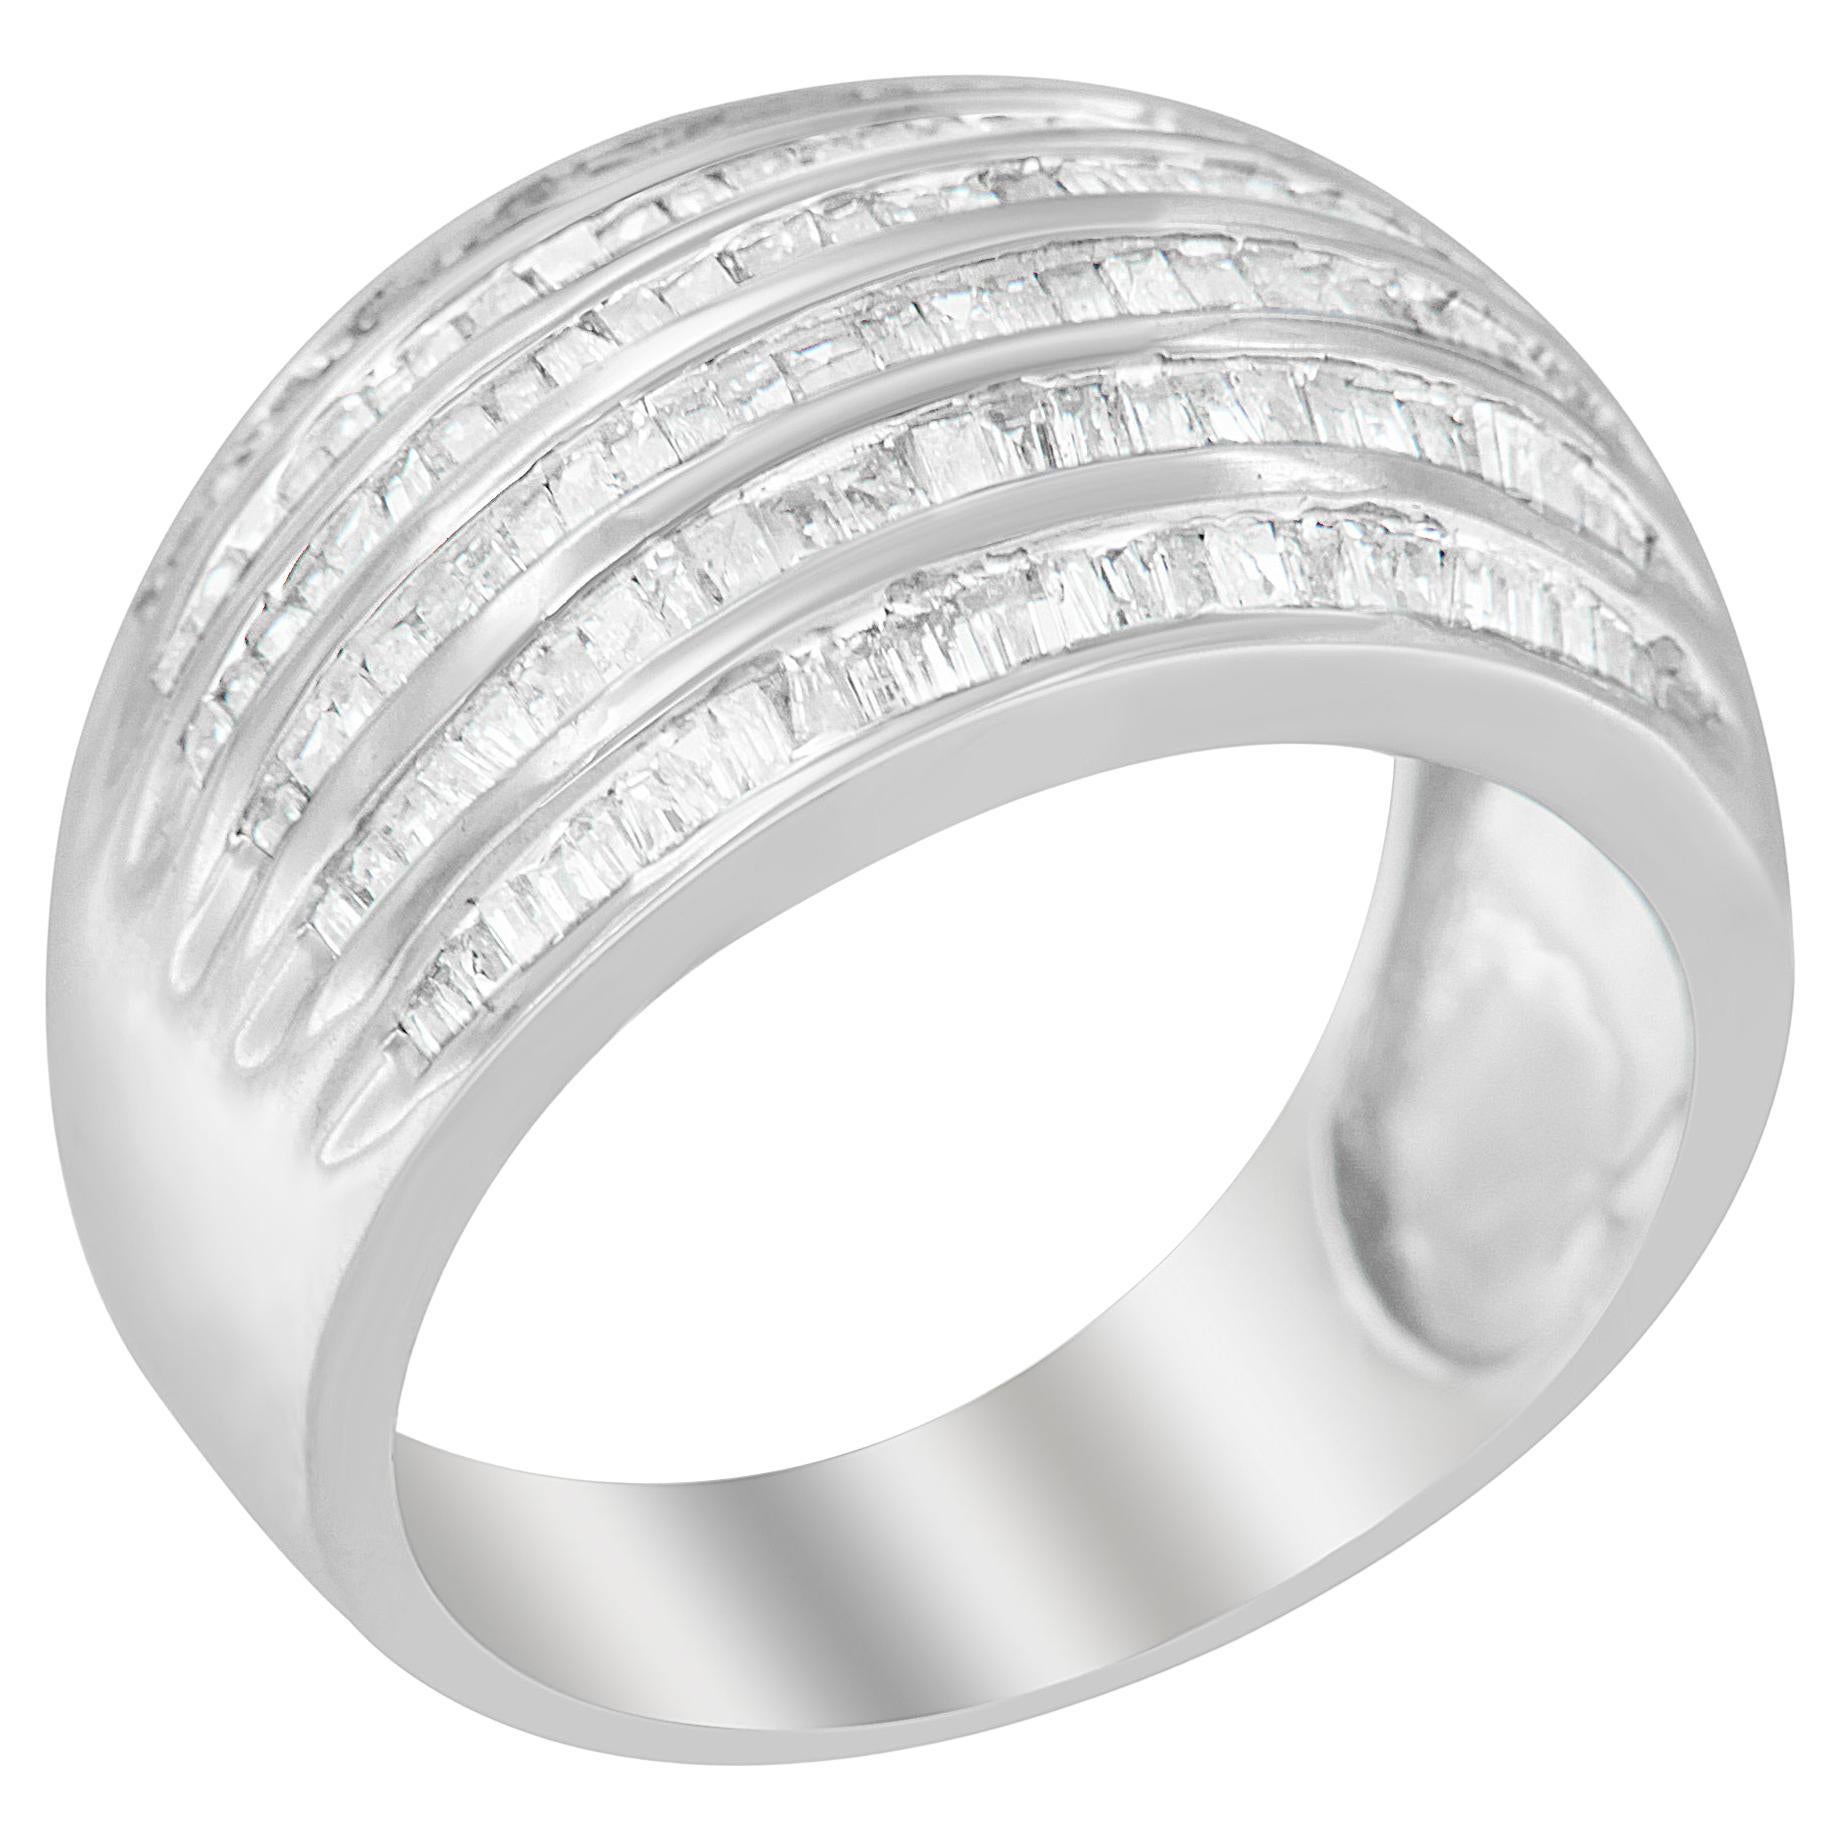 .925 Sterling Silver 1.00 Carat Multi-Row Baguette Diamond Band Cocktail Ring